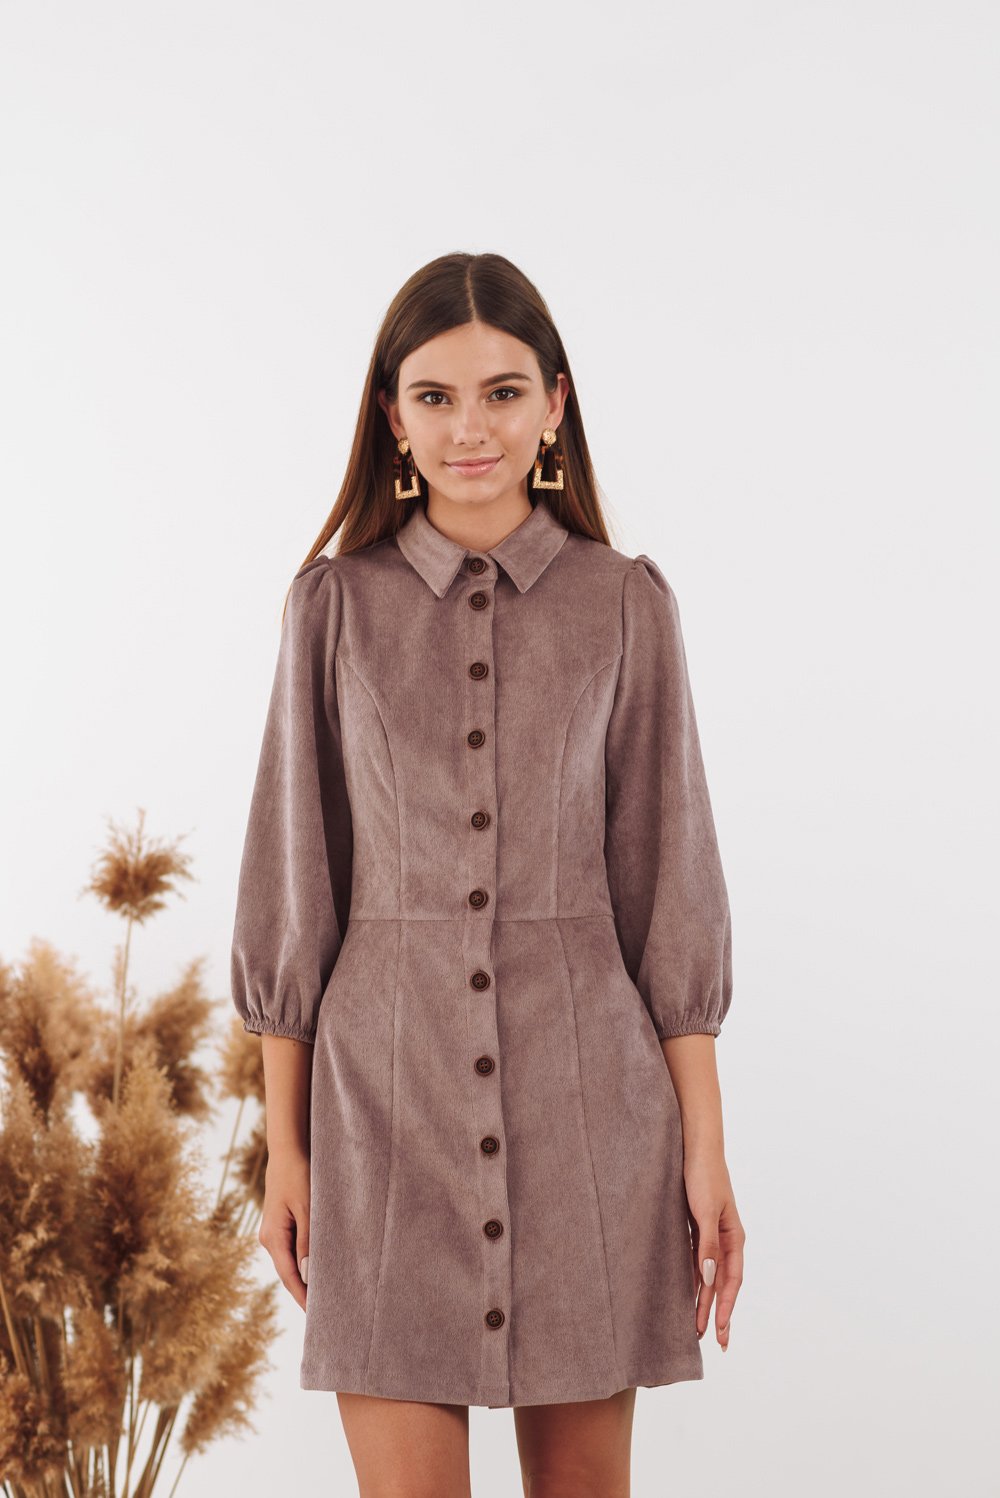 Corduroy dress with buttons